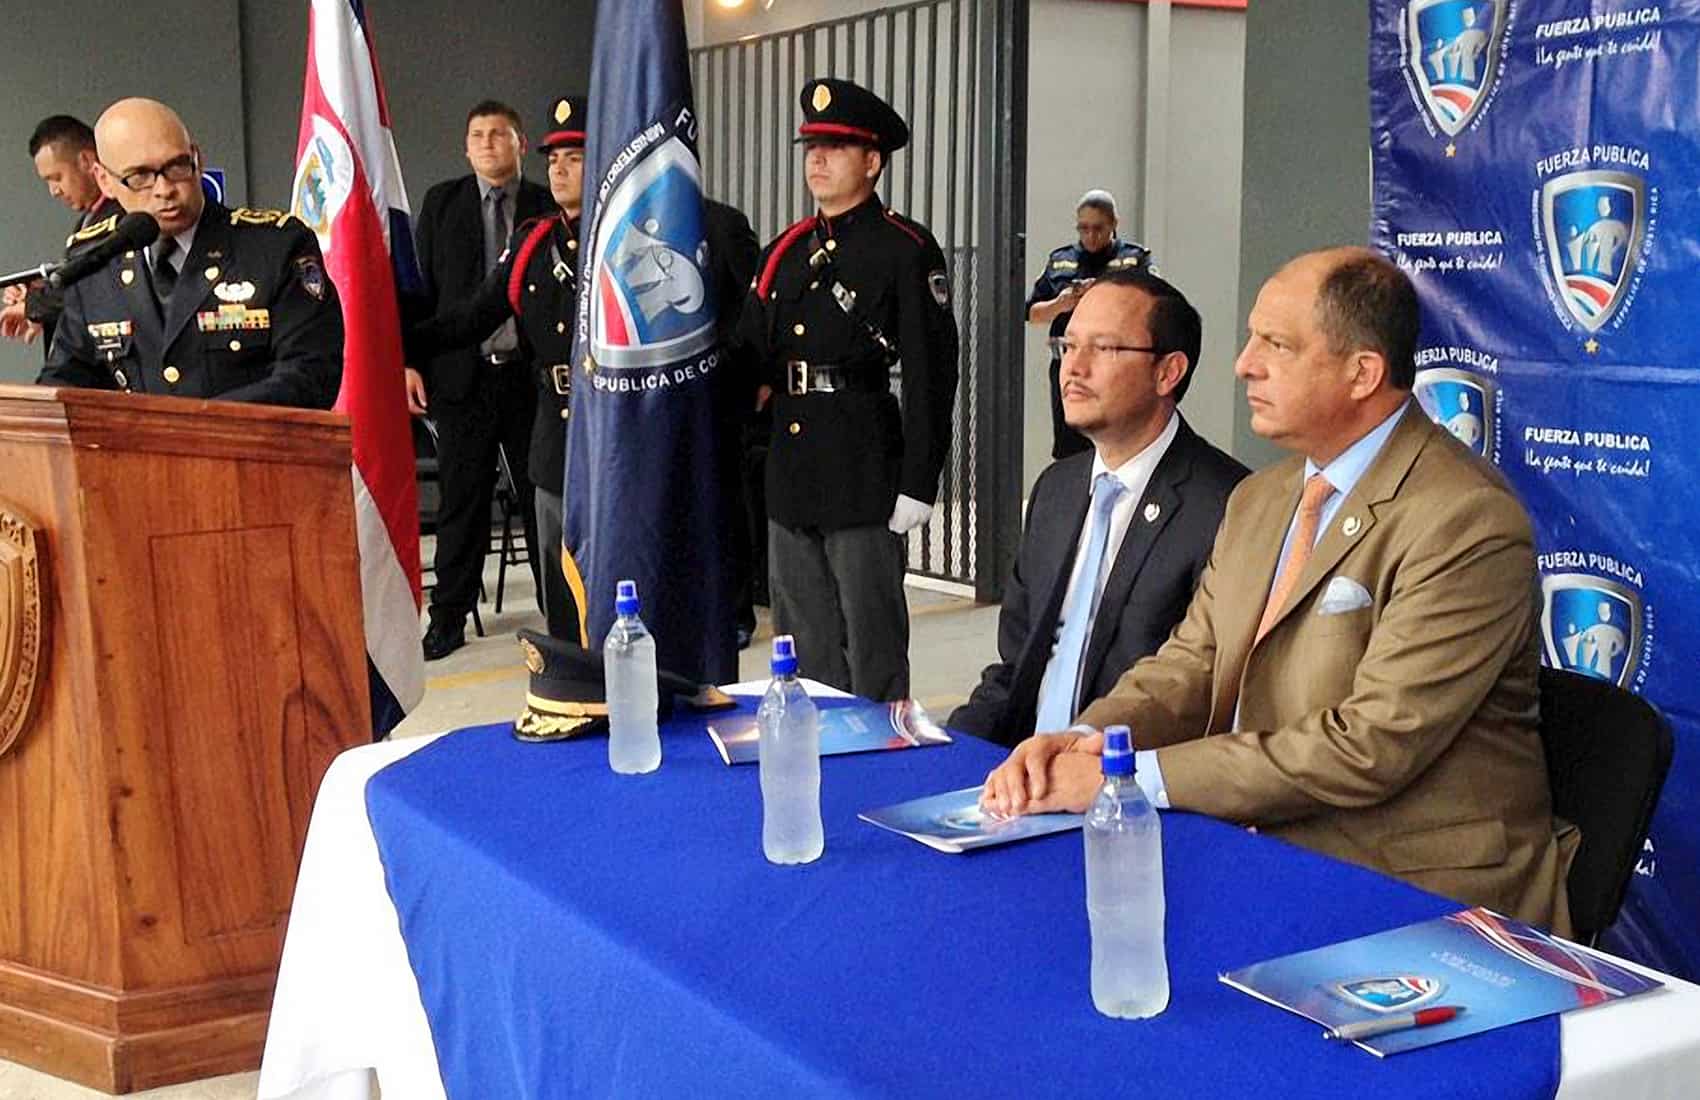 President Luis Guillermo Solís, Security Minister Celso Gamboa